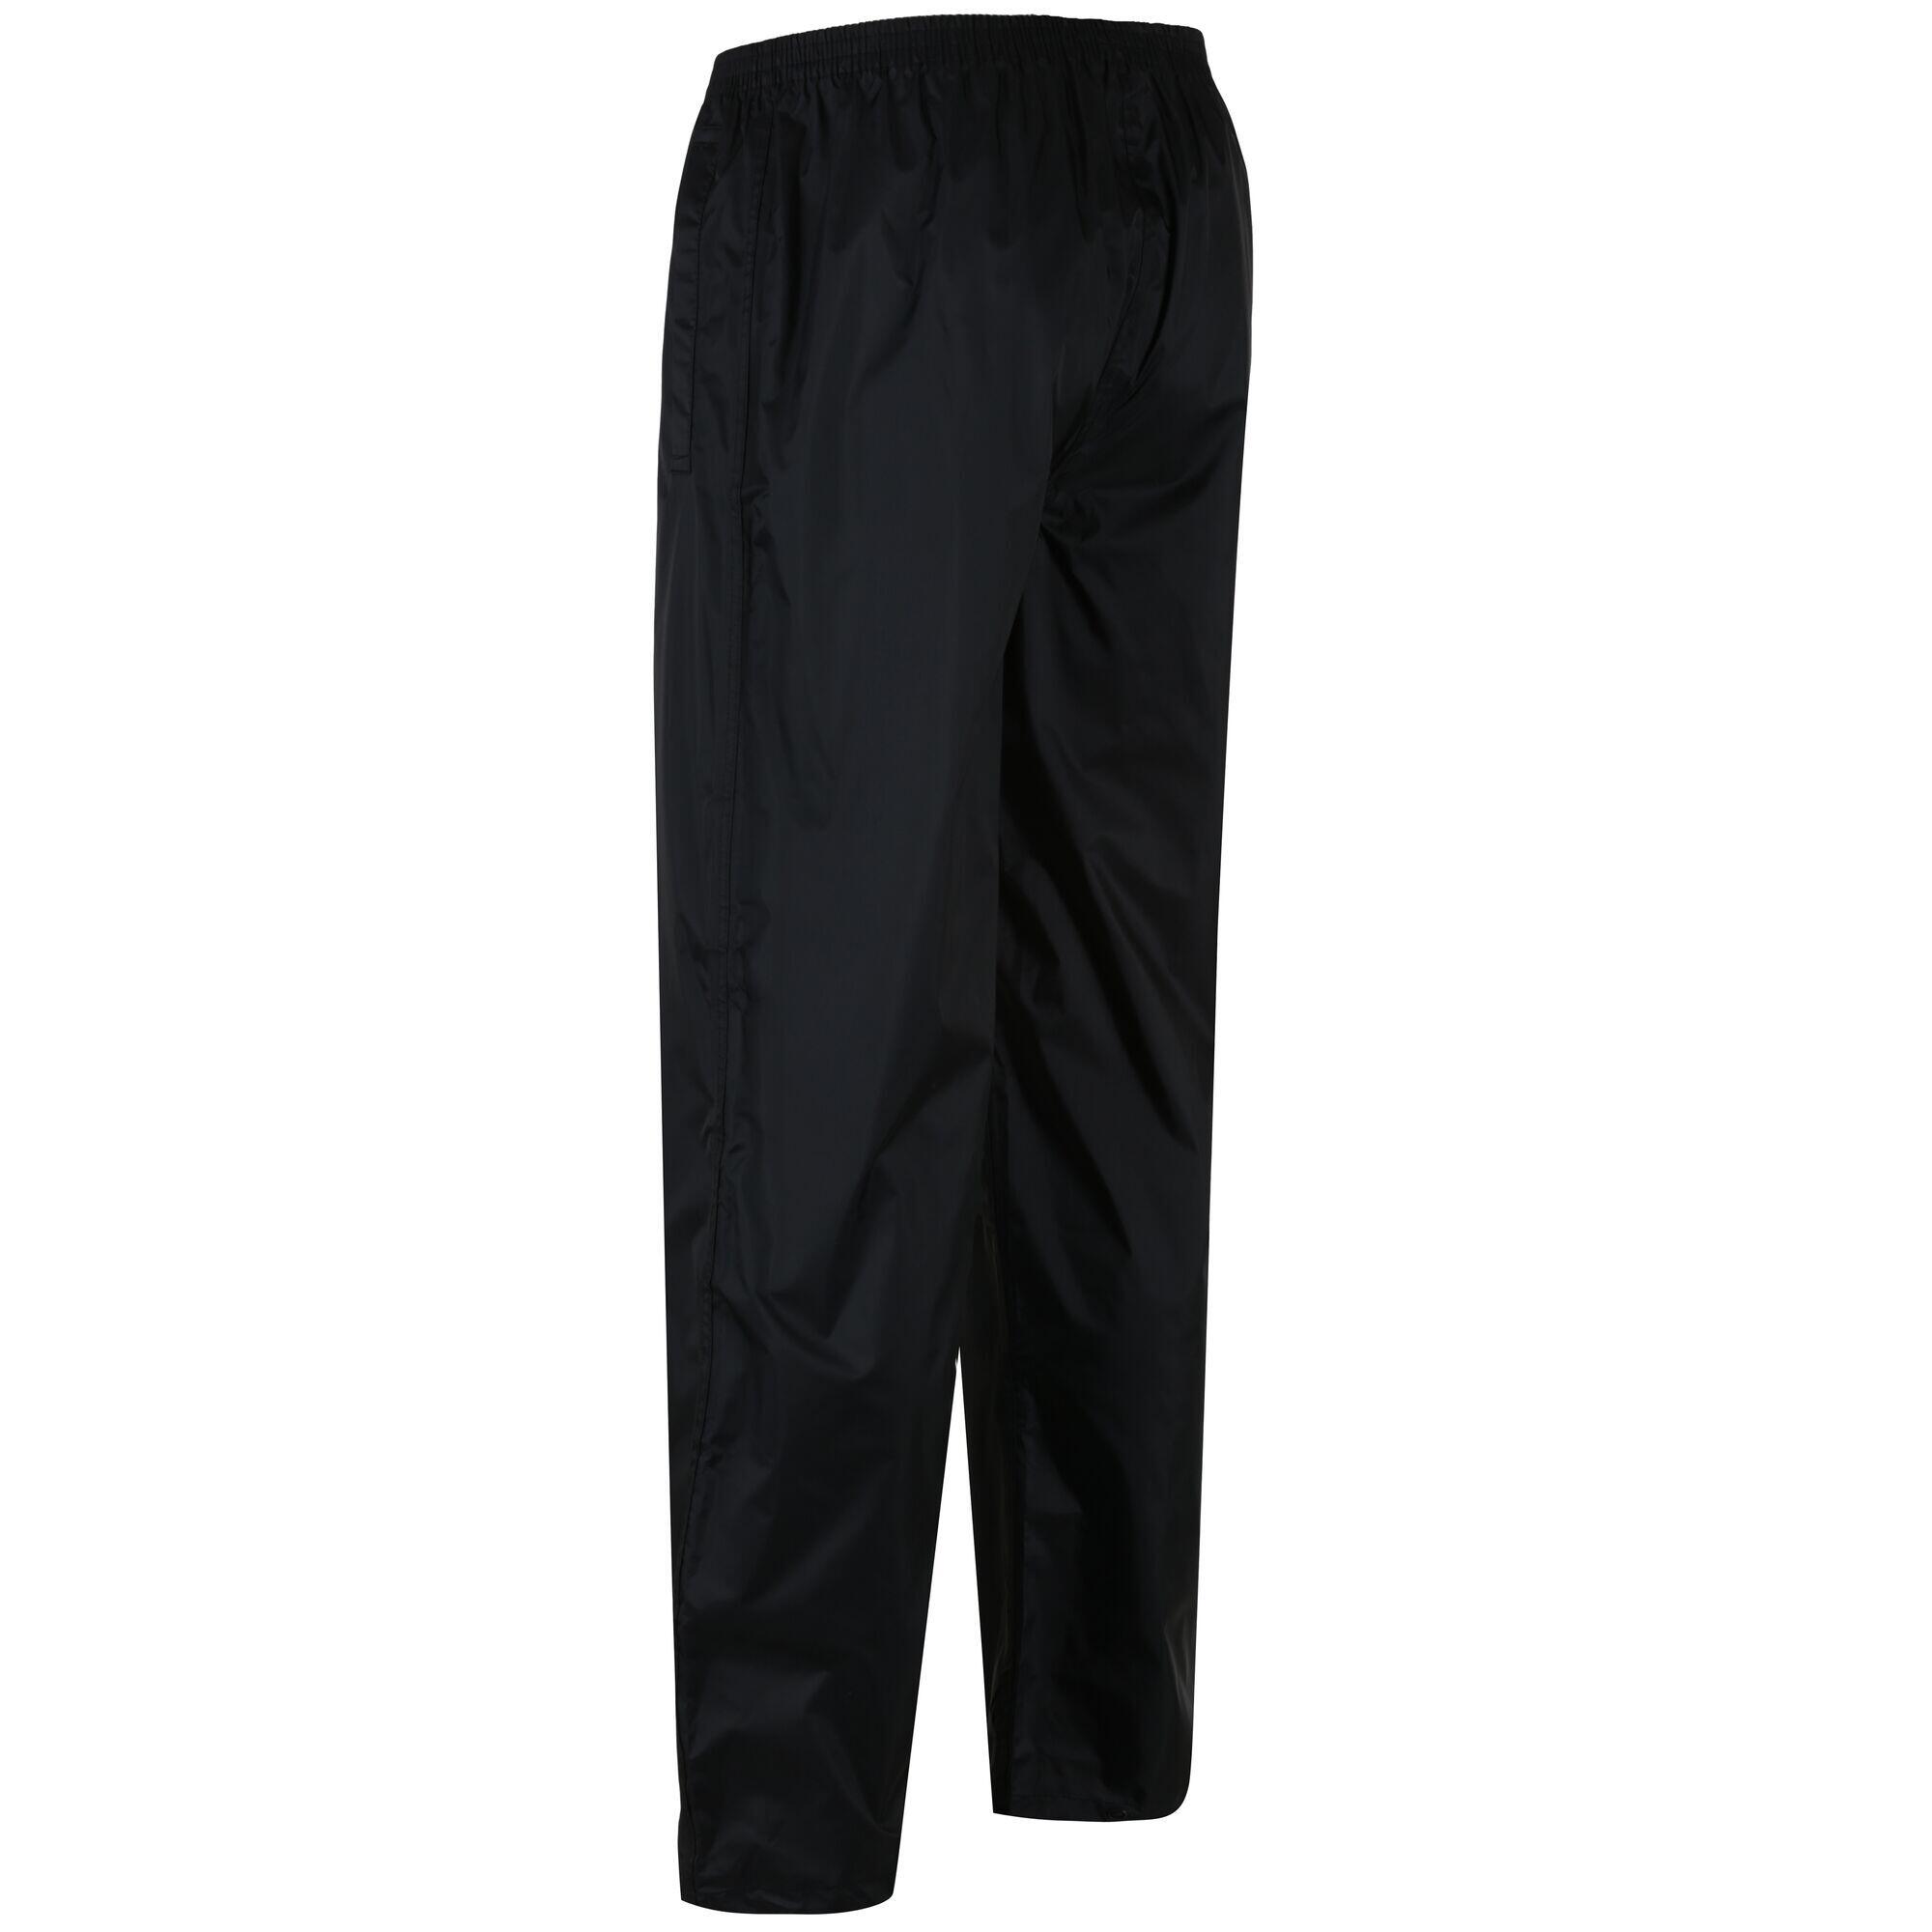 Pack-It Men's Hiking Overtrousers 6/7